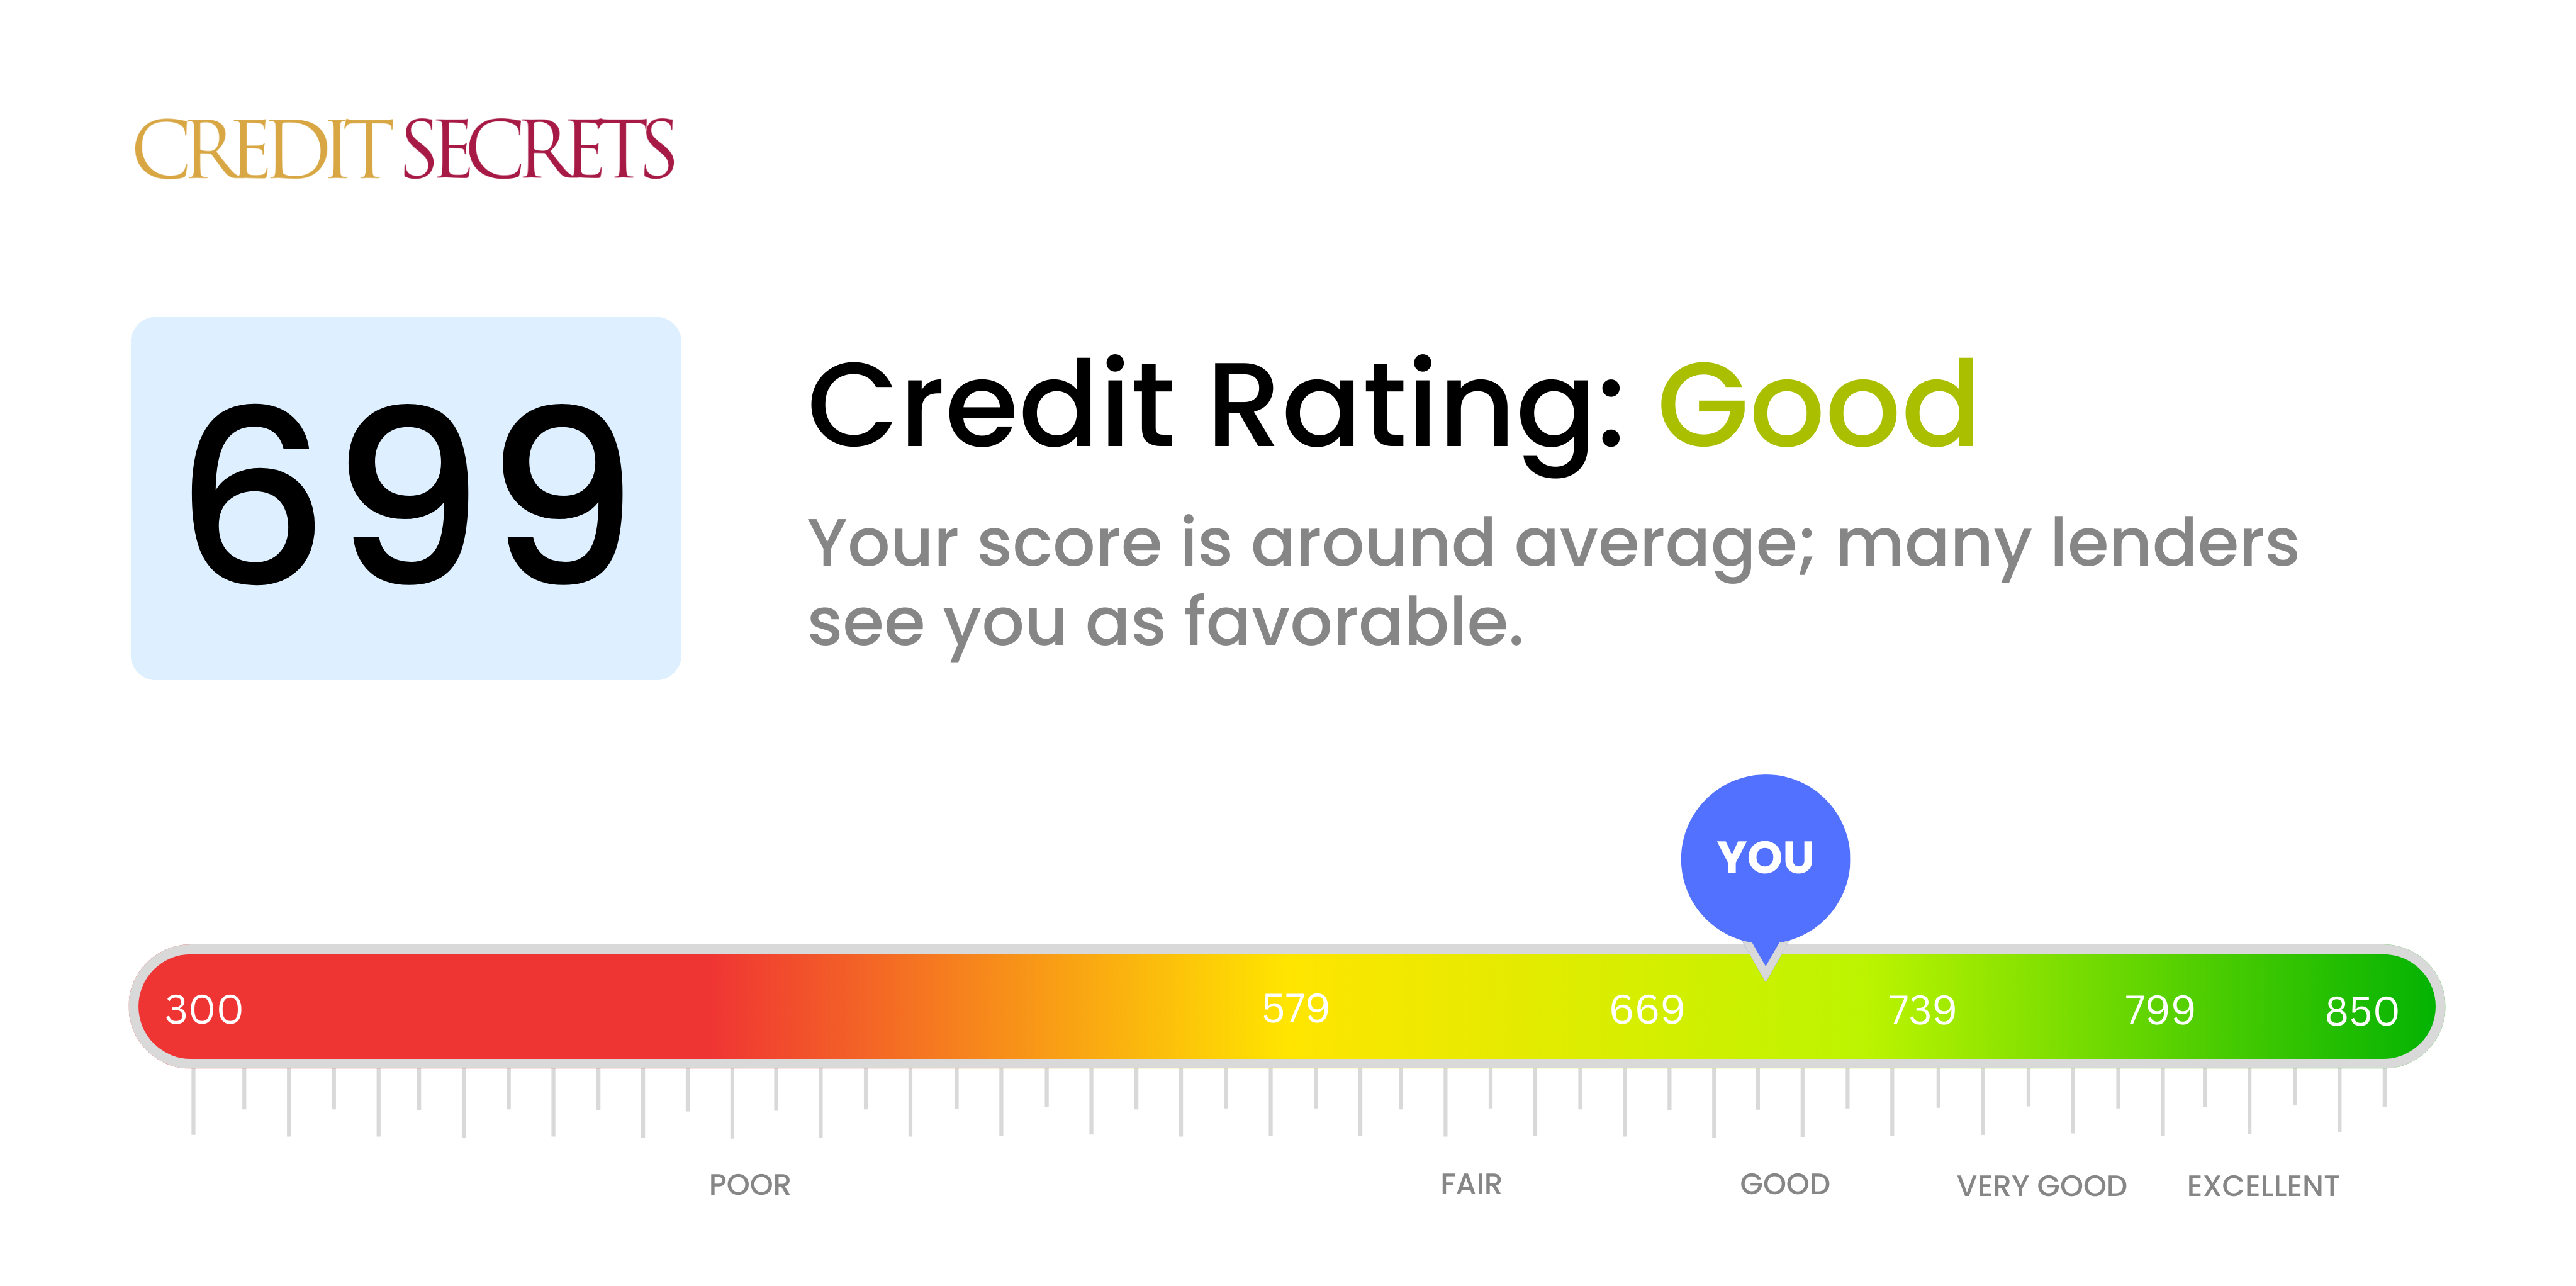 Is 699 a good credit score?